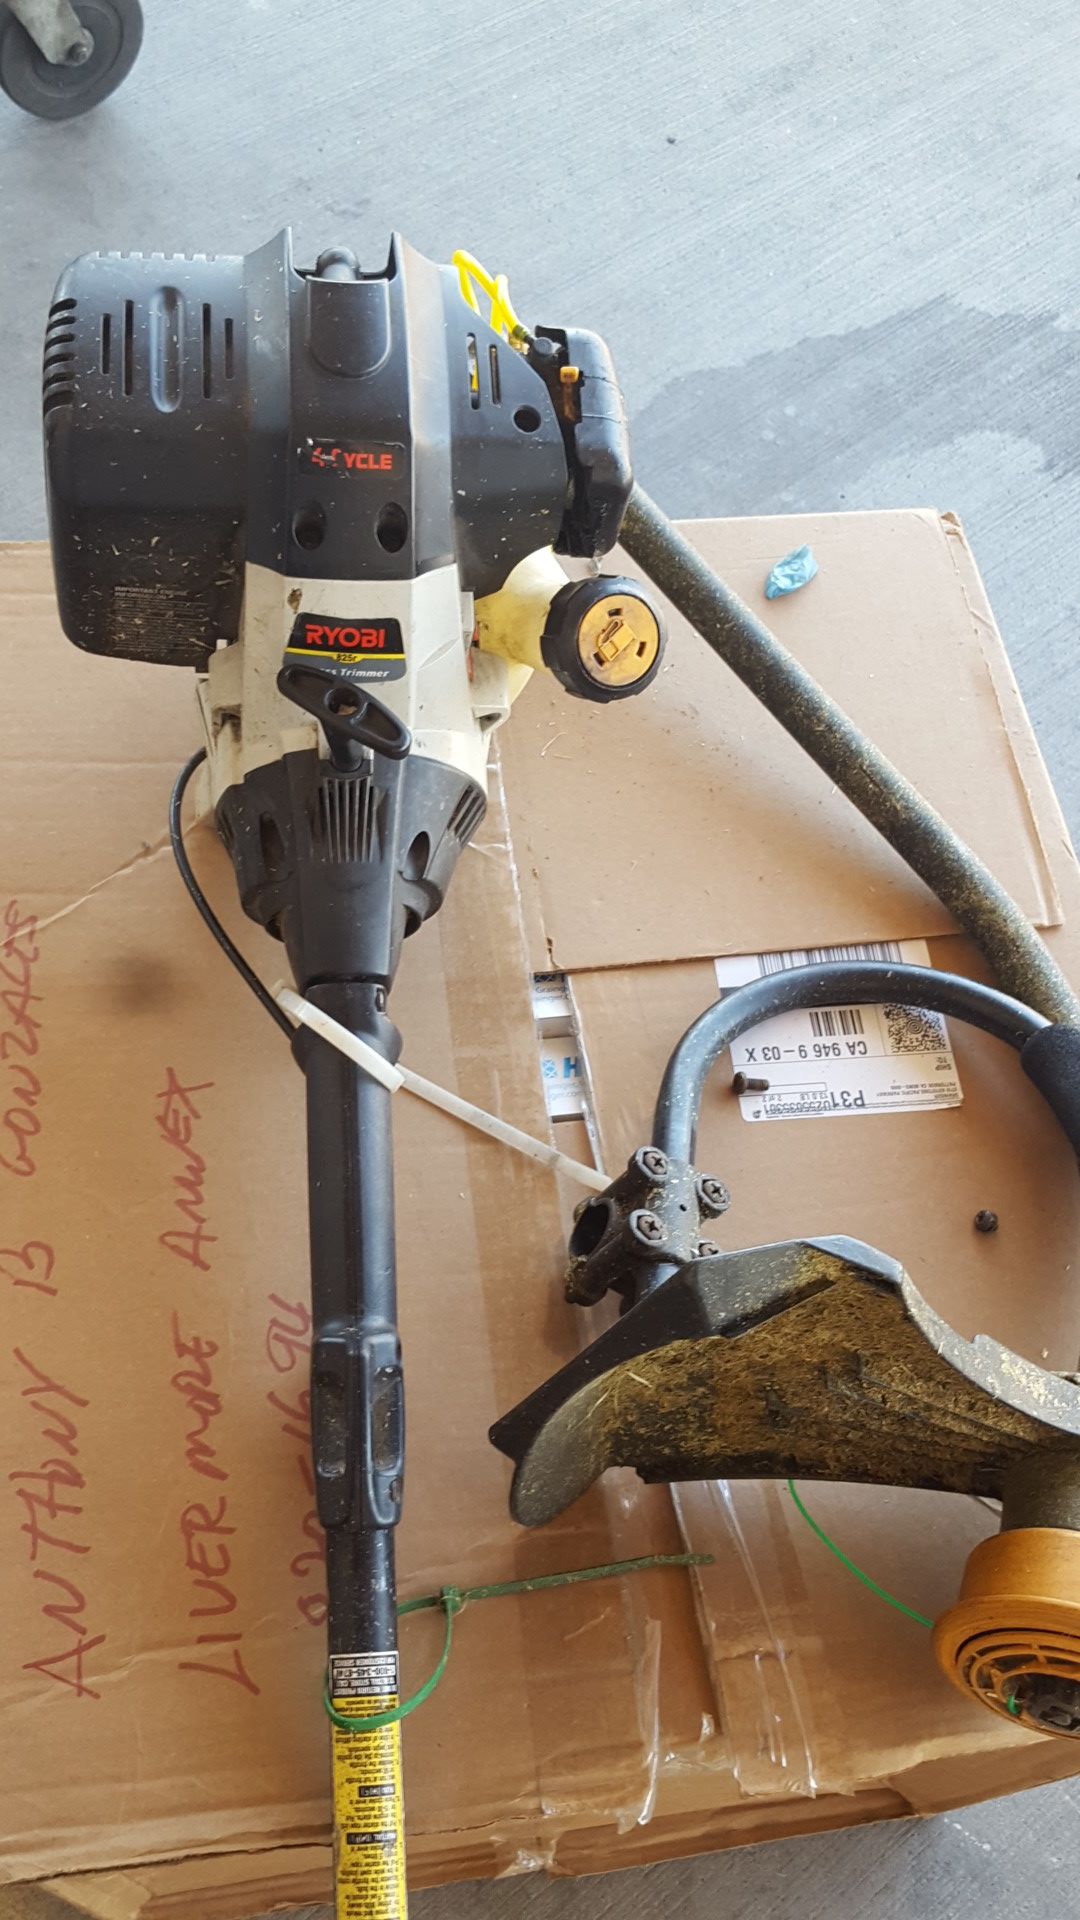 Parting out Ryobi 4-cycle weed eater